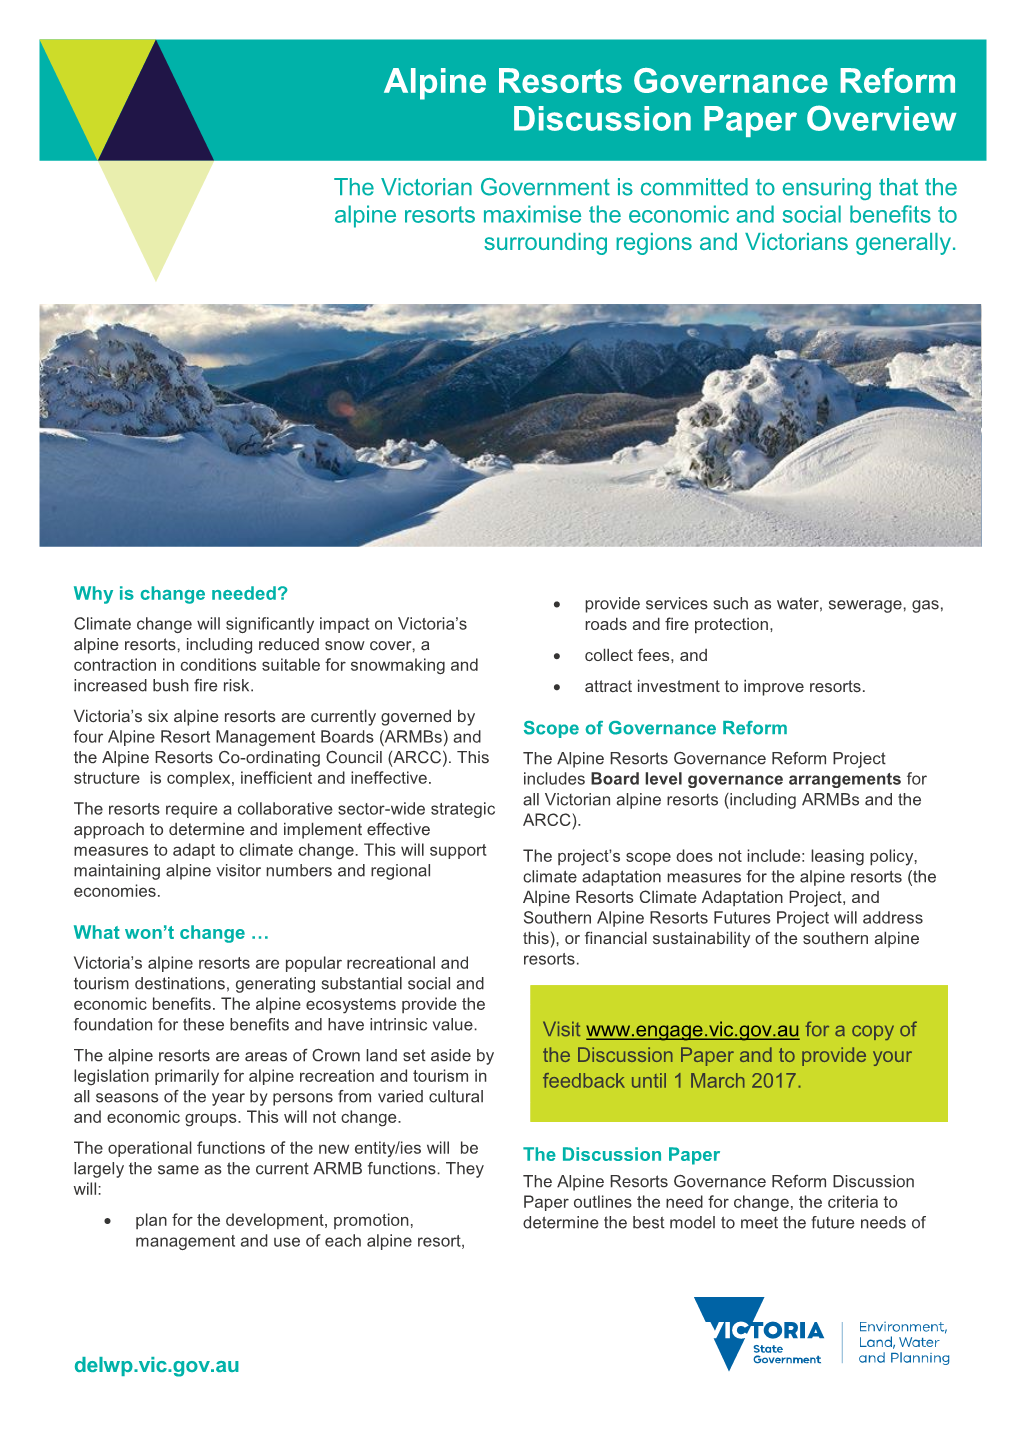 Alpine Resorts Governance Reform Discussion Paper Overview